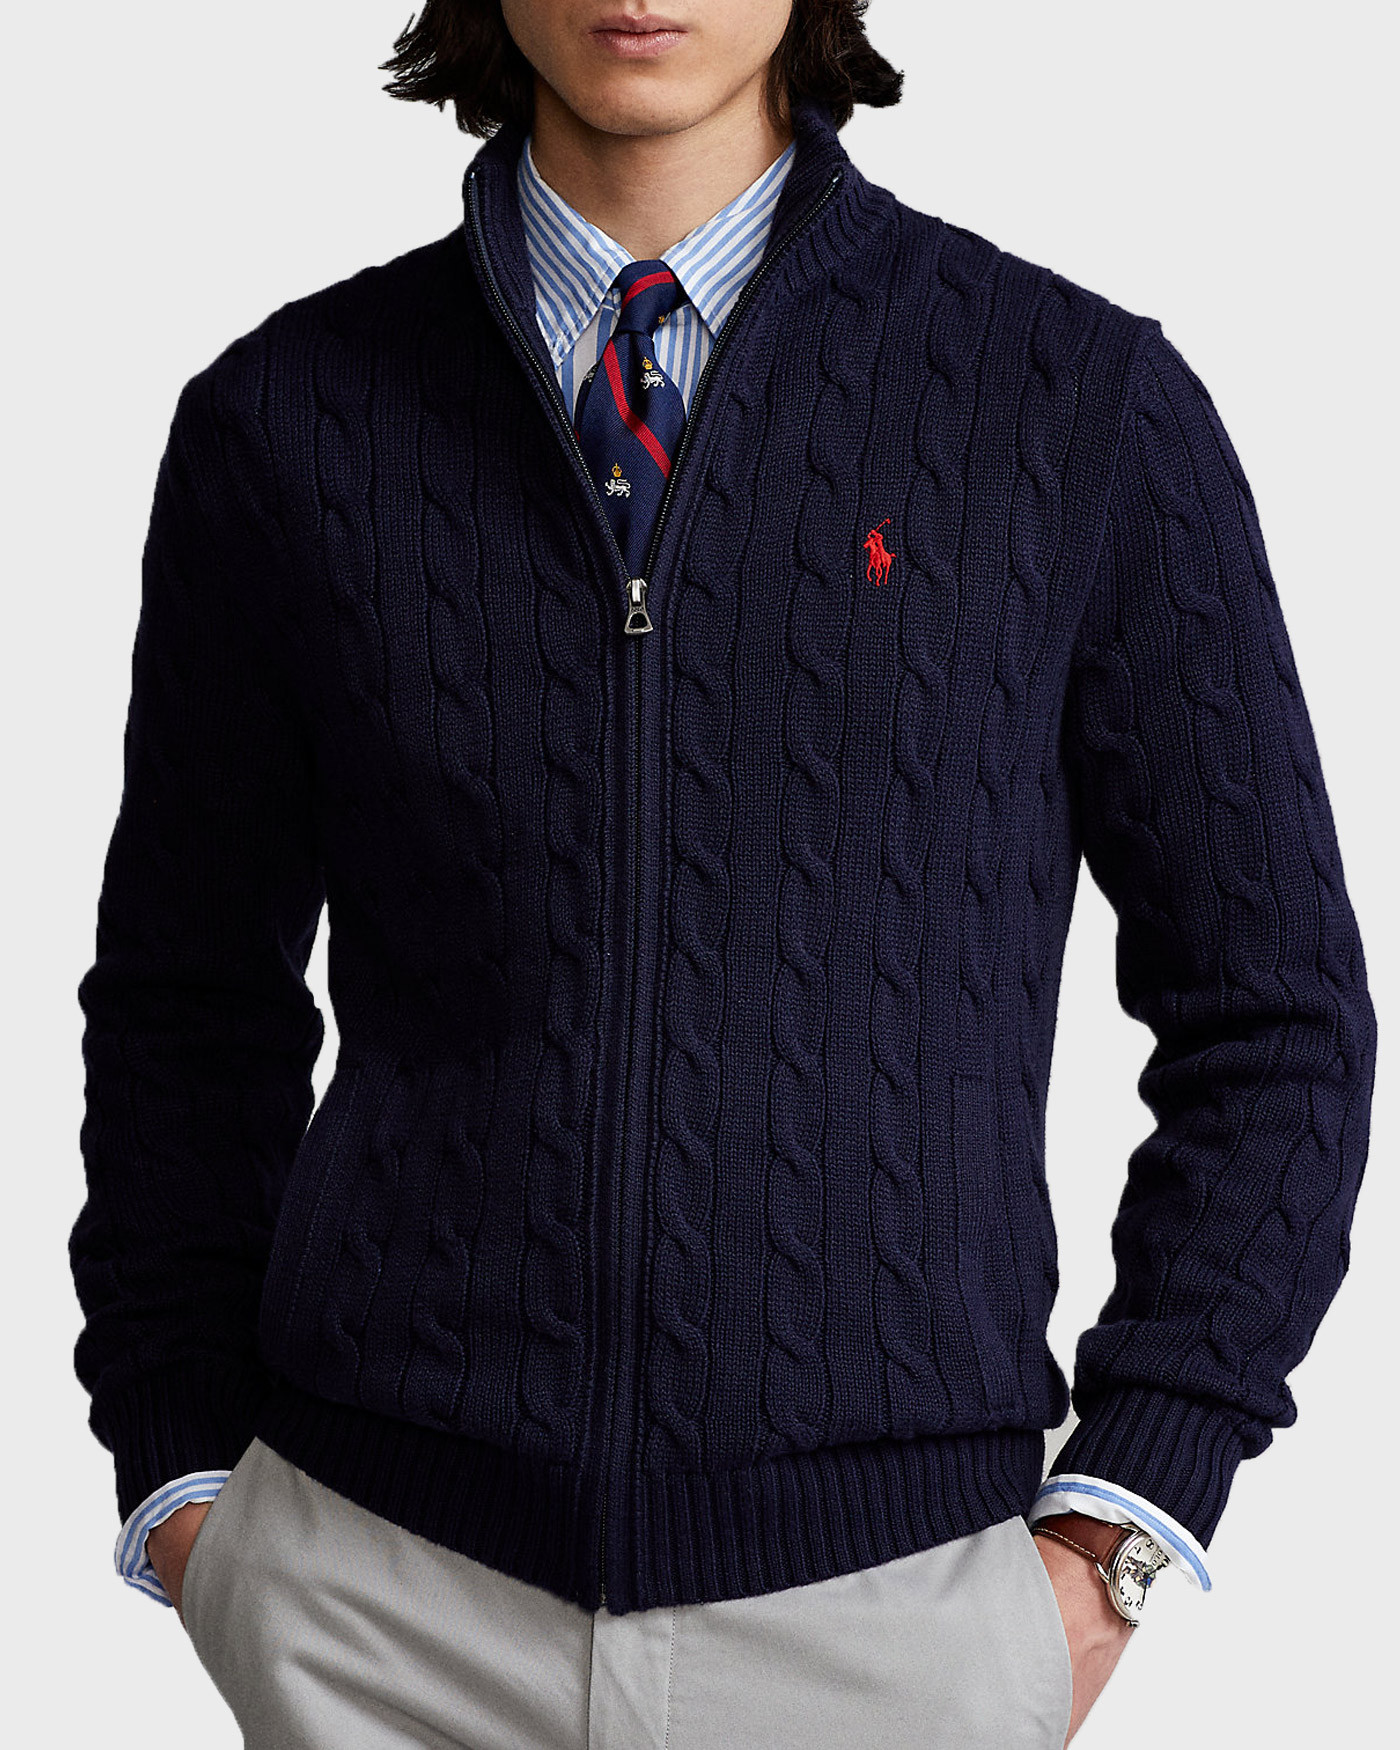 POLO RALPH LAUREN ΜΕΝ'S CARDIGAN Cable-Knit Cotton Full-Zip Jumper -  710860350001 